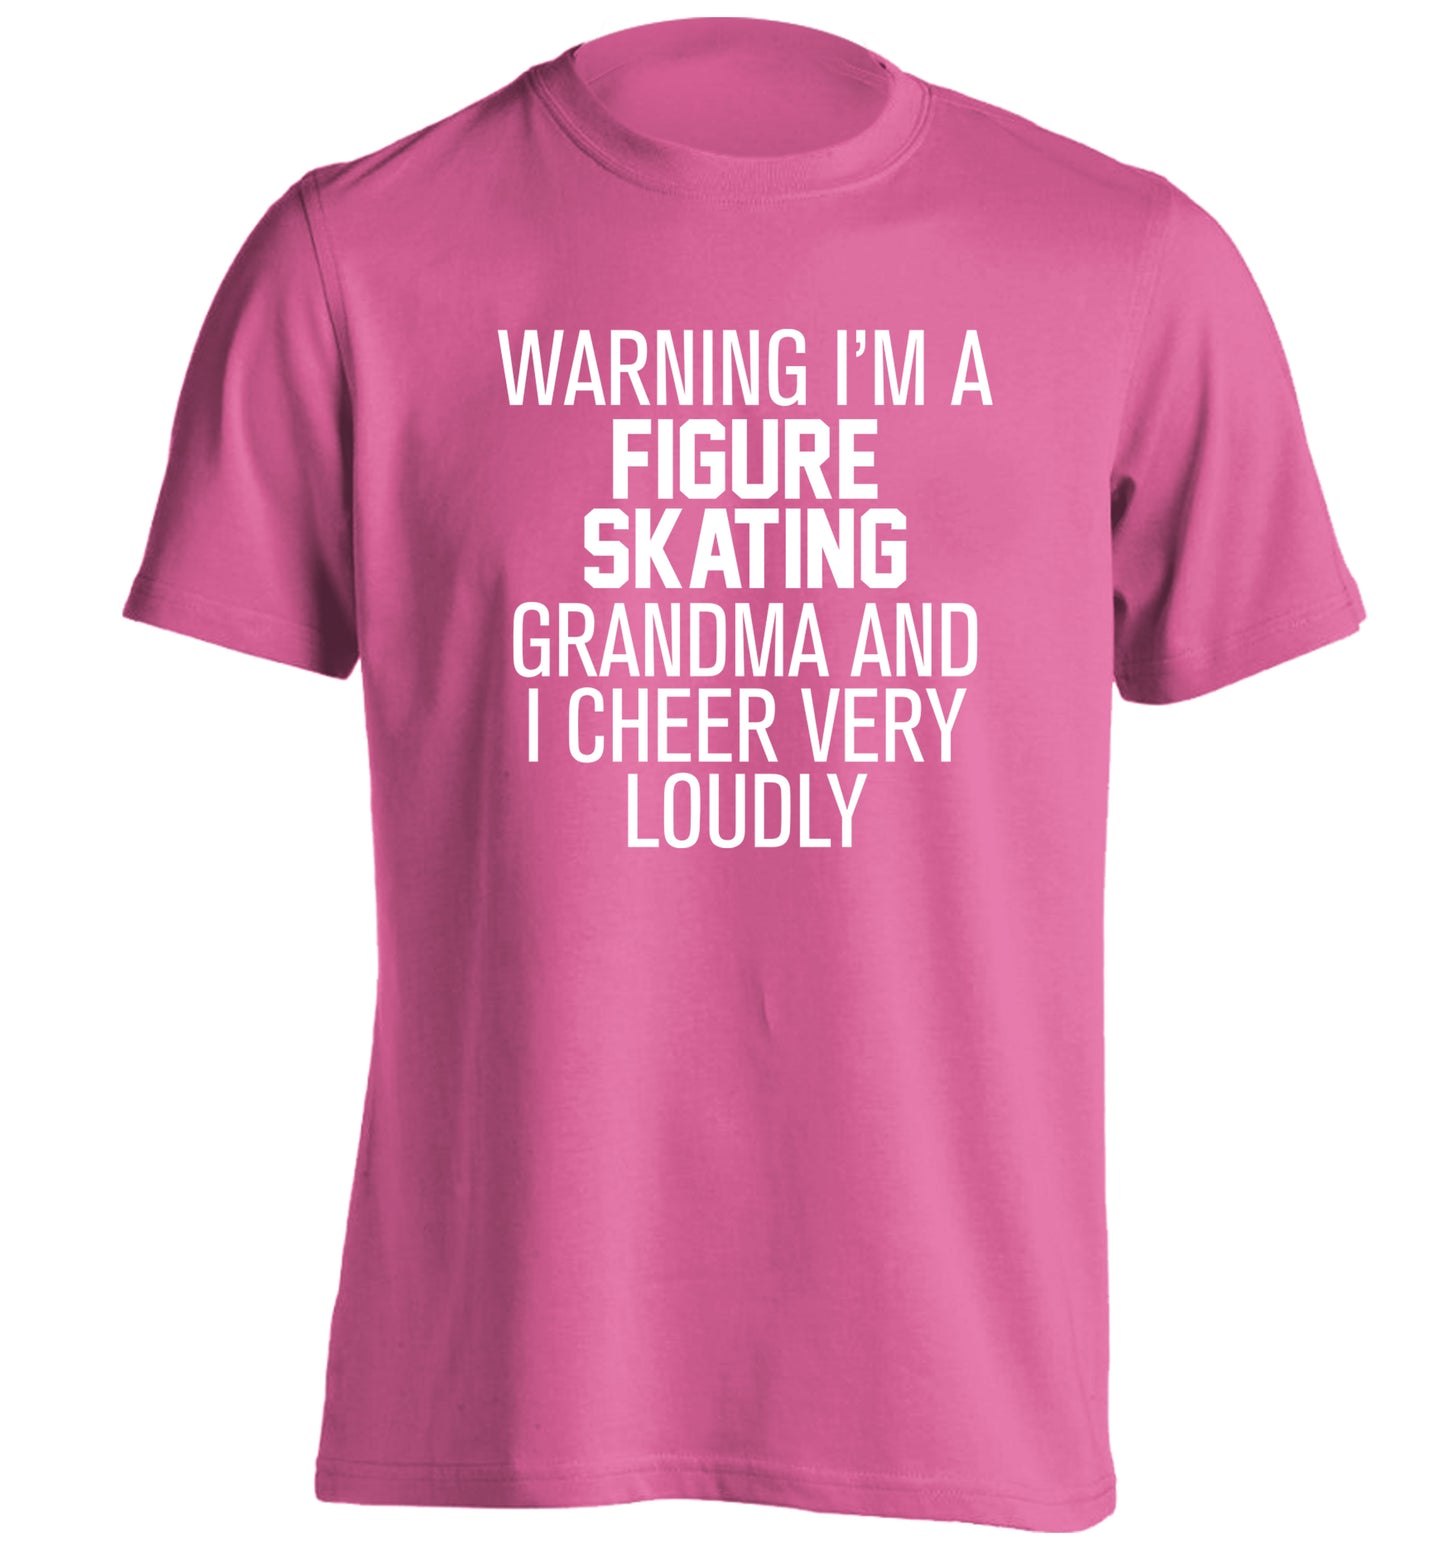 Warning I'm a figure skating grandma and I cheer very loudly adults unisexpink Tshirt 2XL